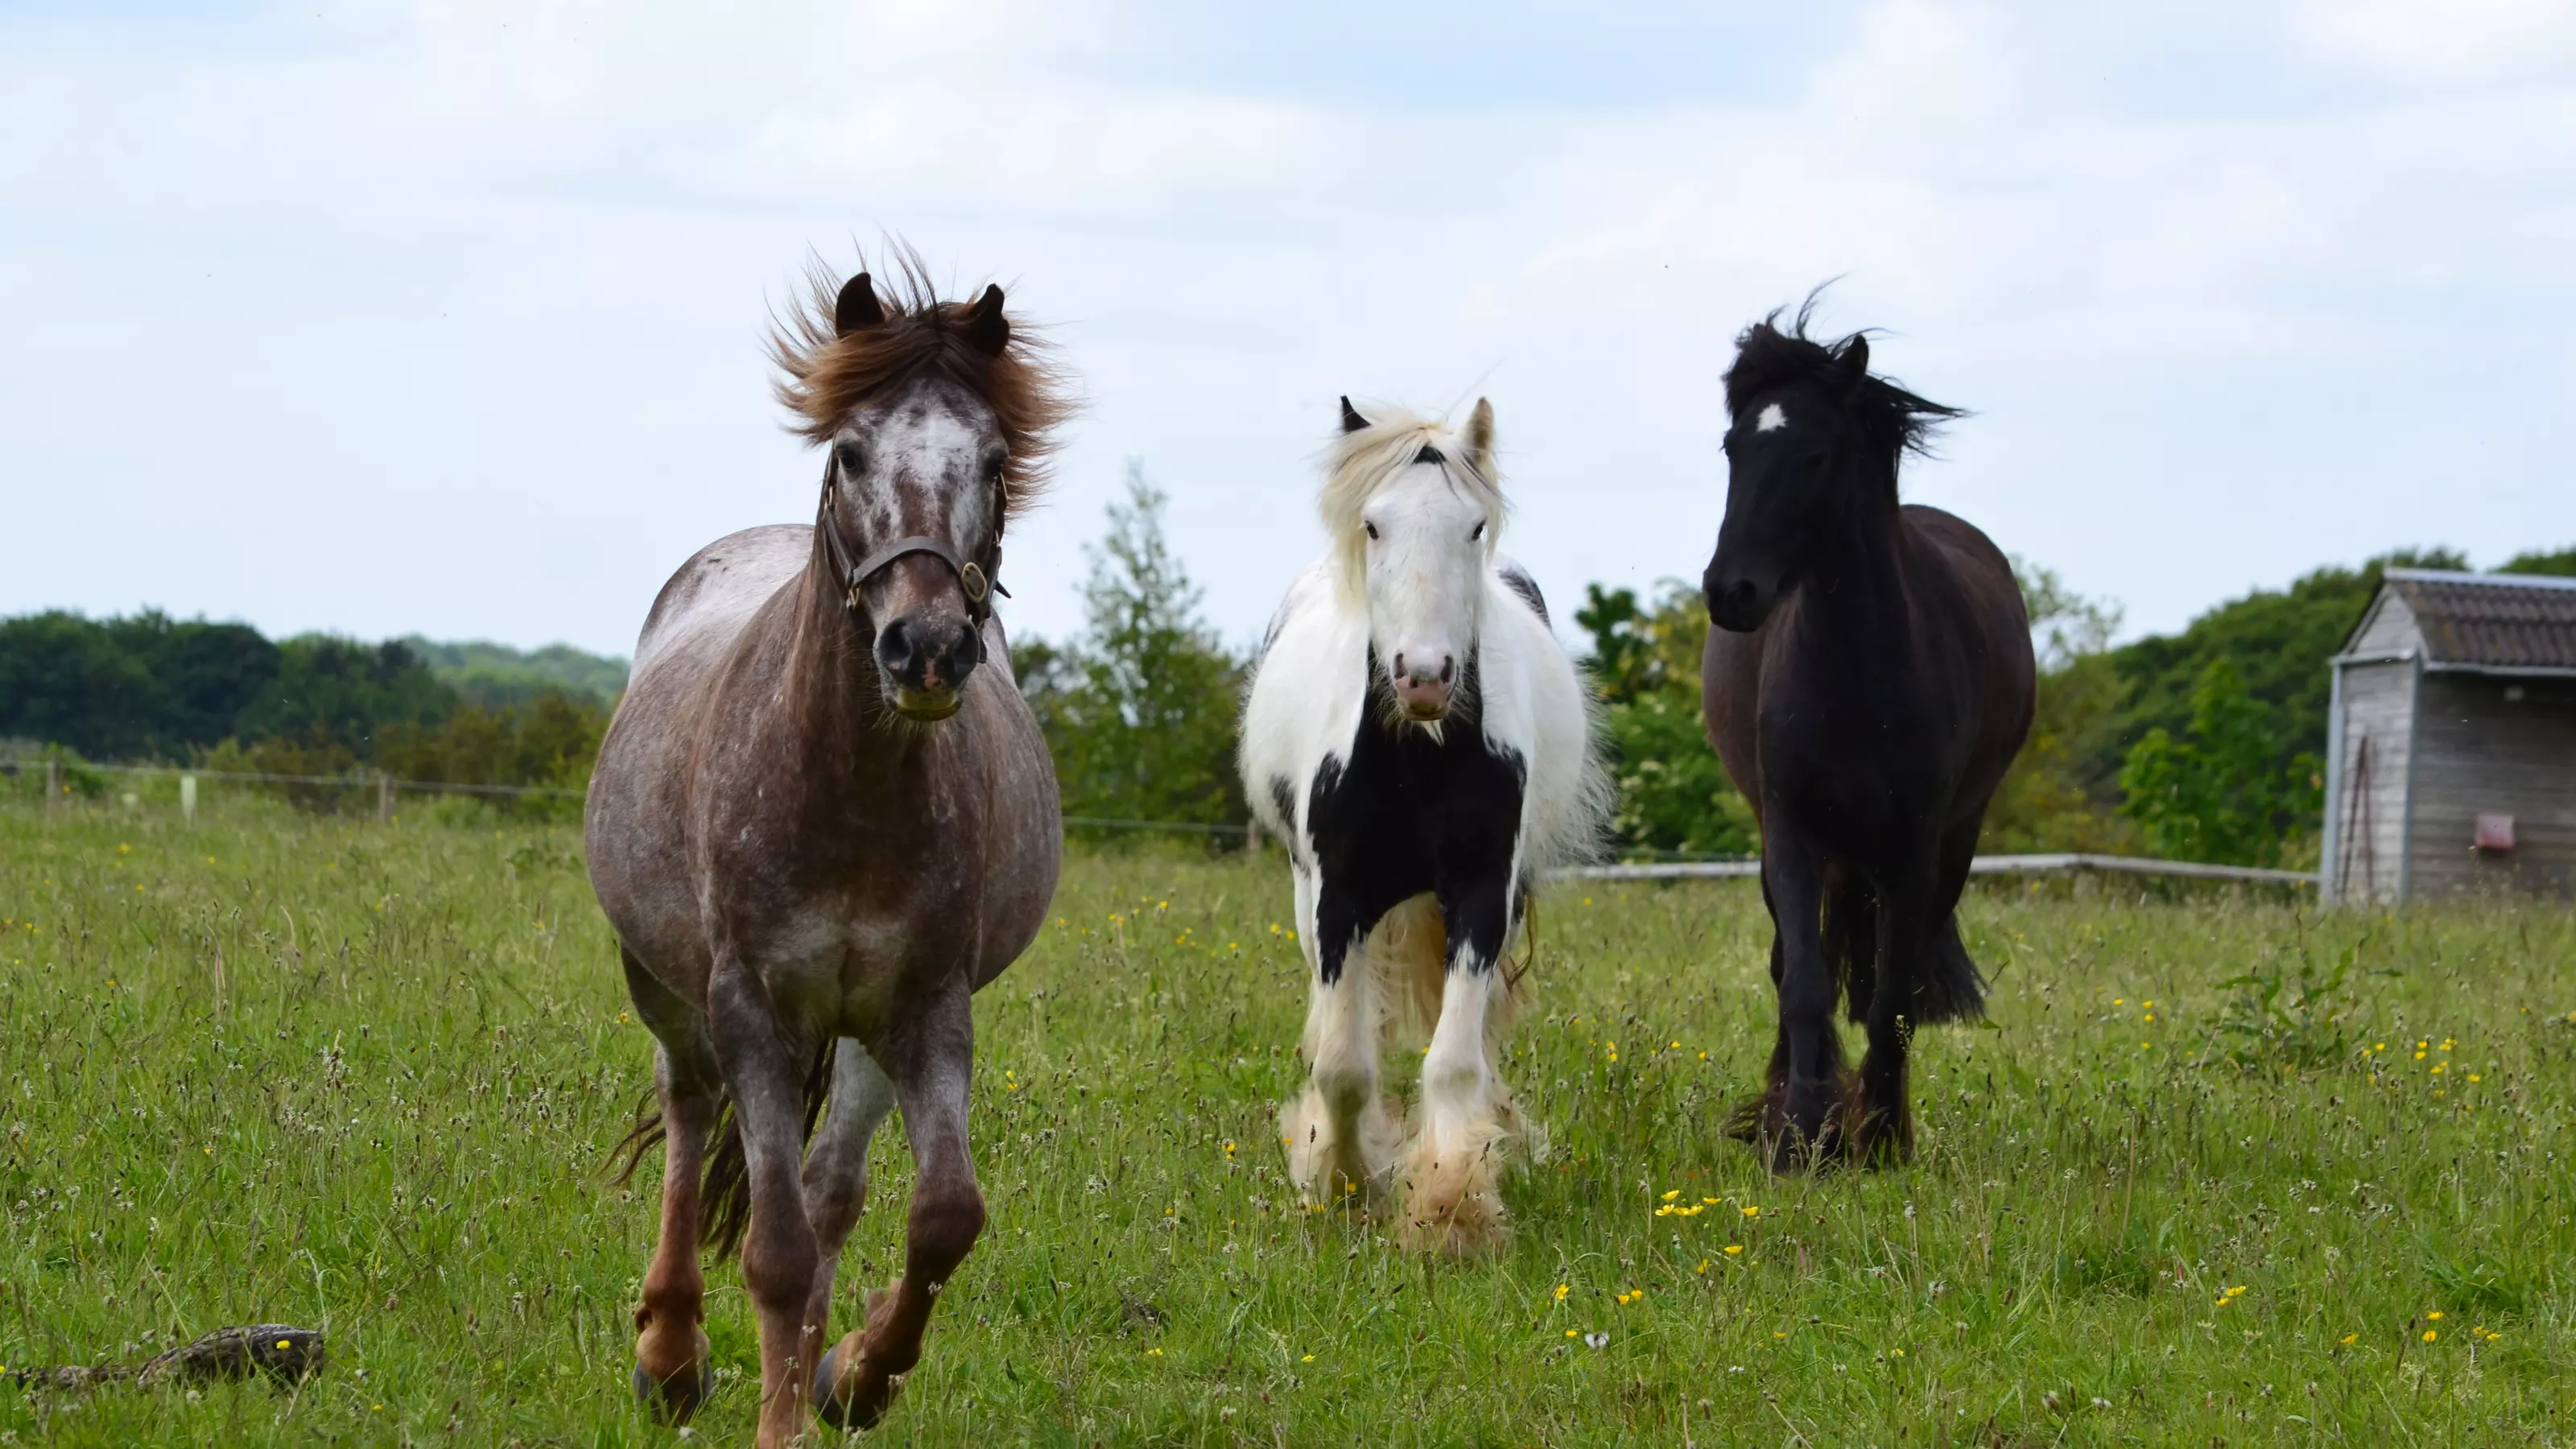 Strawberry roan pony Barley gallops through a field with a piebald pony and a black pony